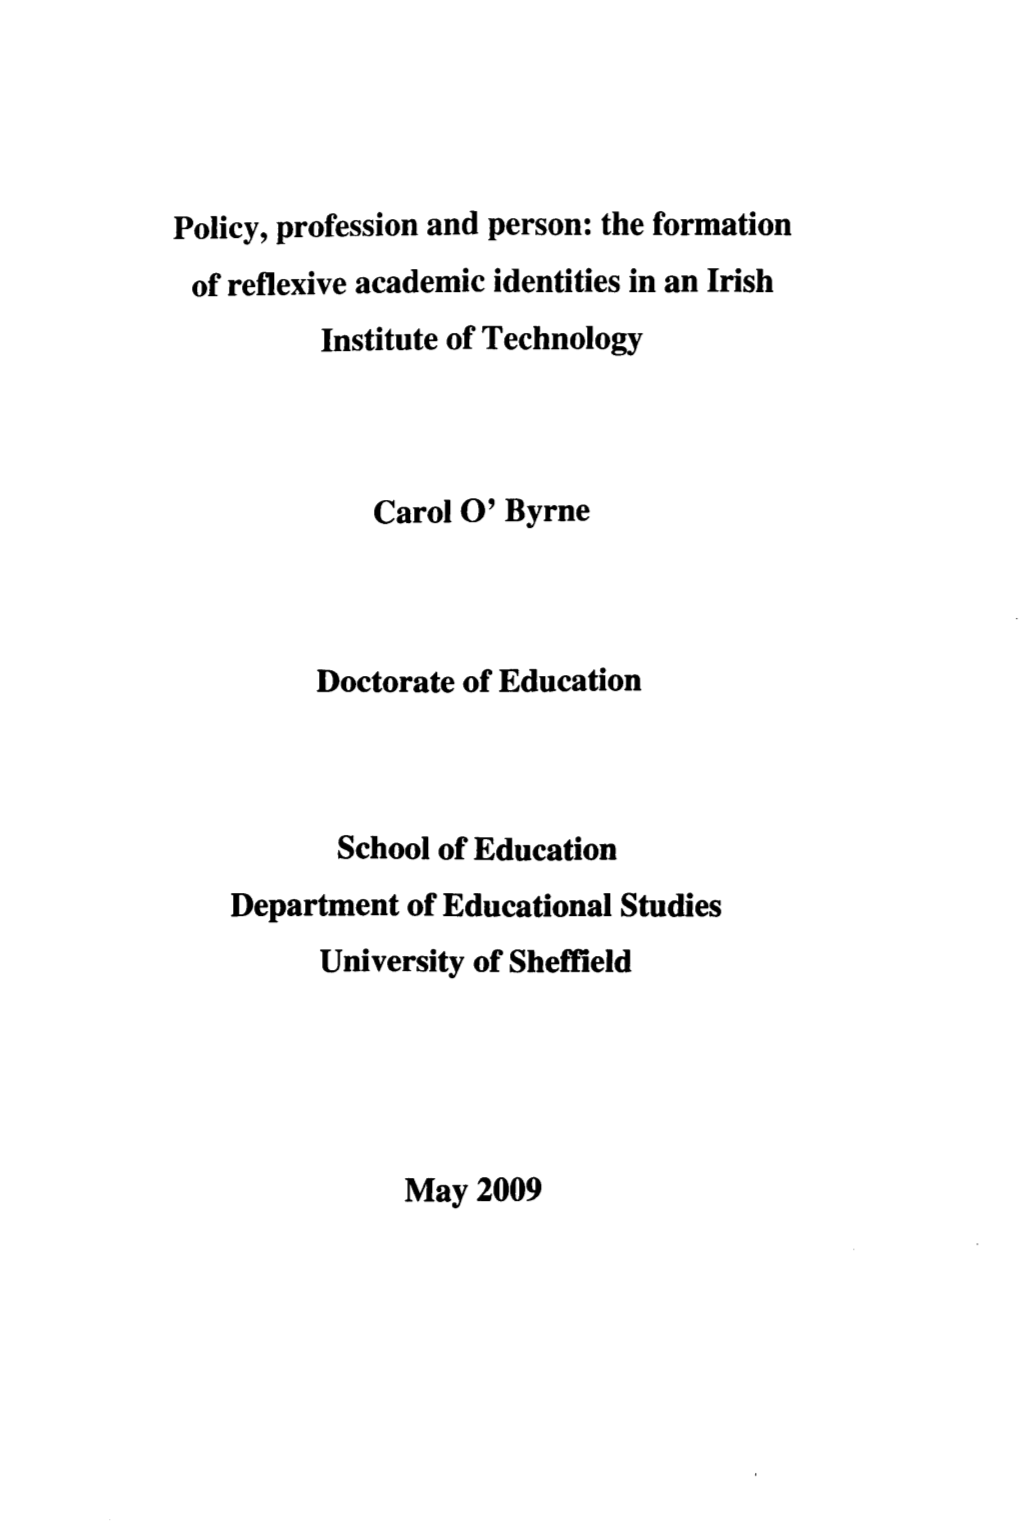 The Formation of Reflexive Academic Identities in an Irish Institute of Technology